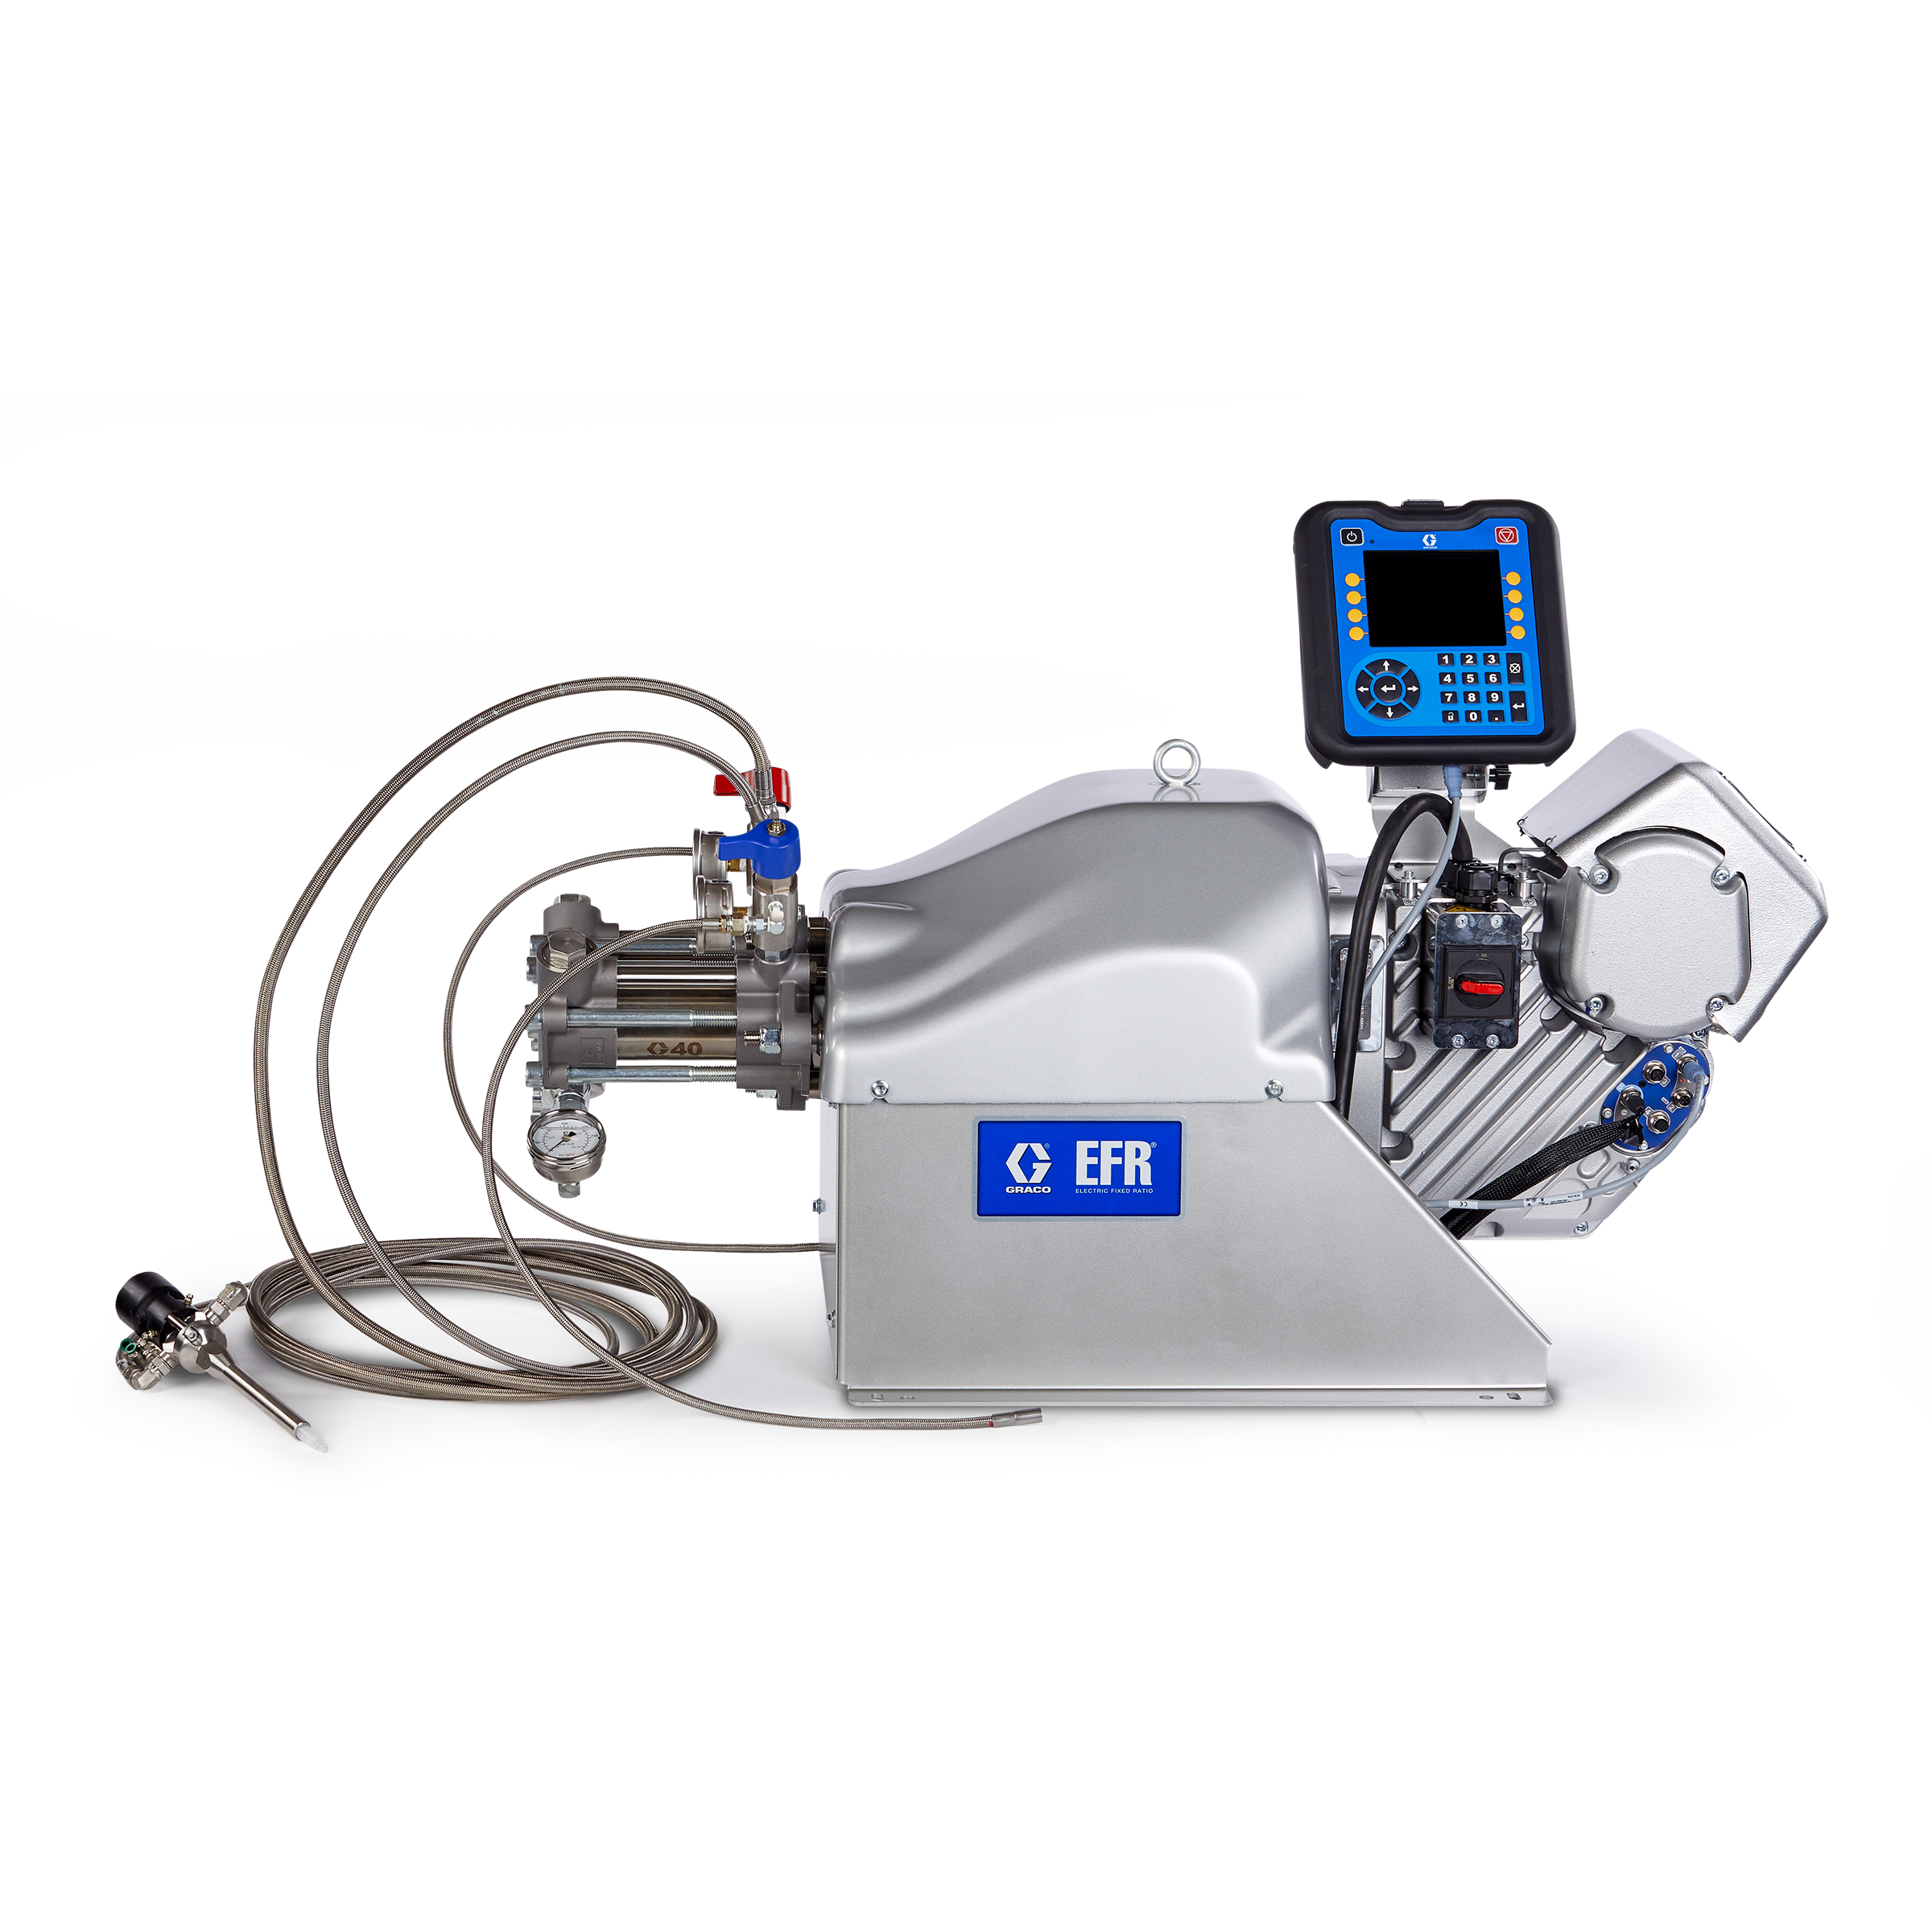 Graco EFR system for dispensing 